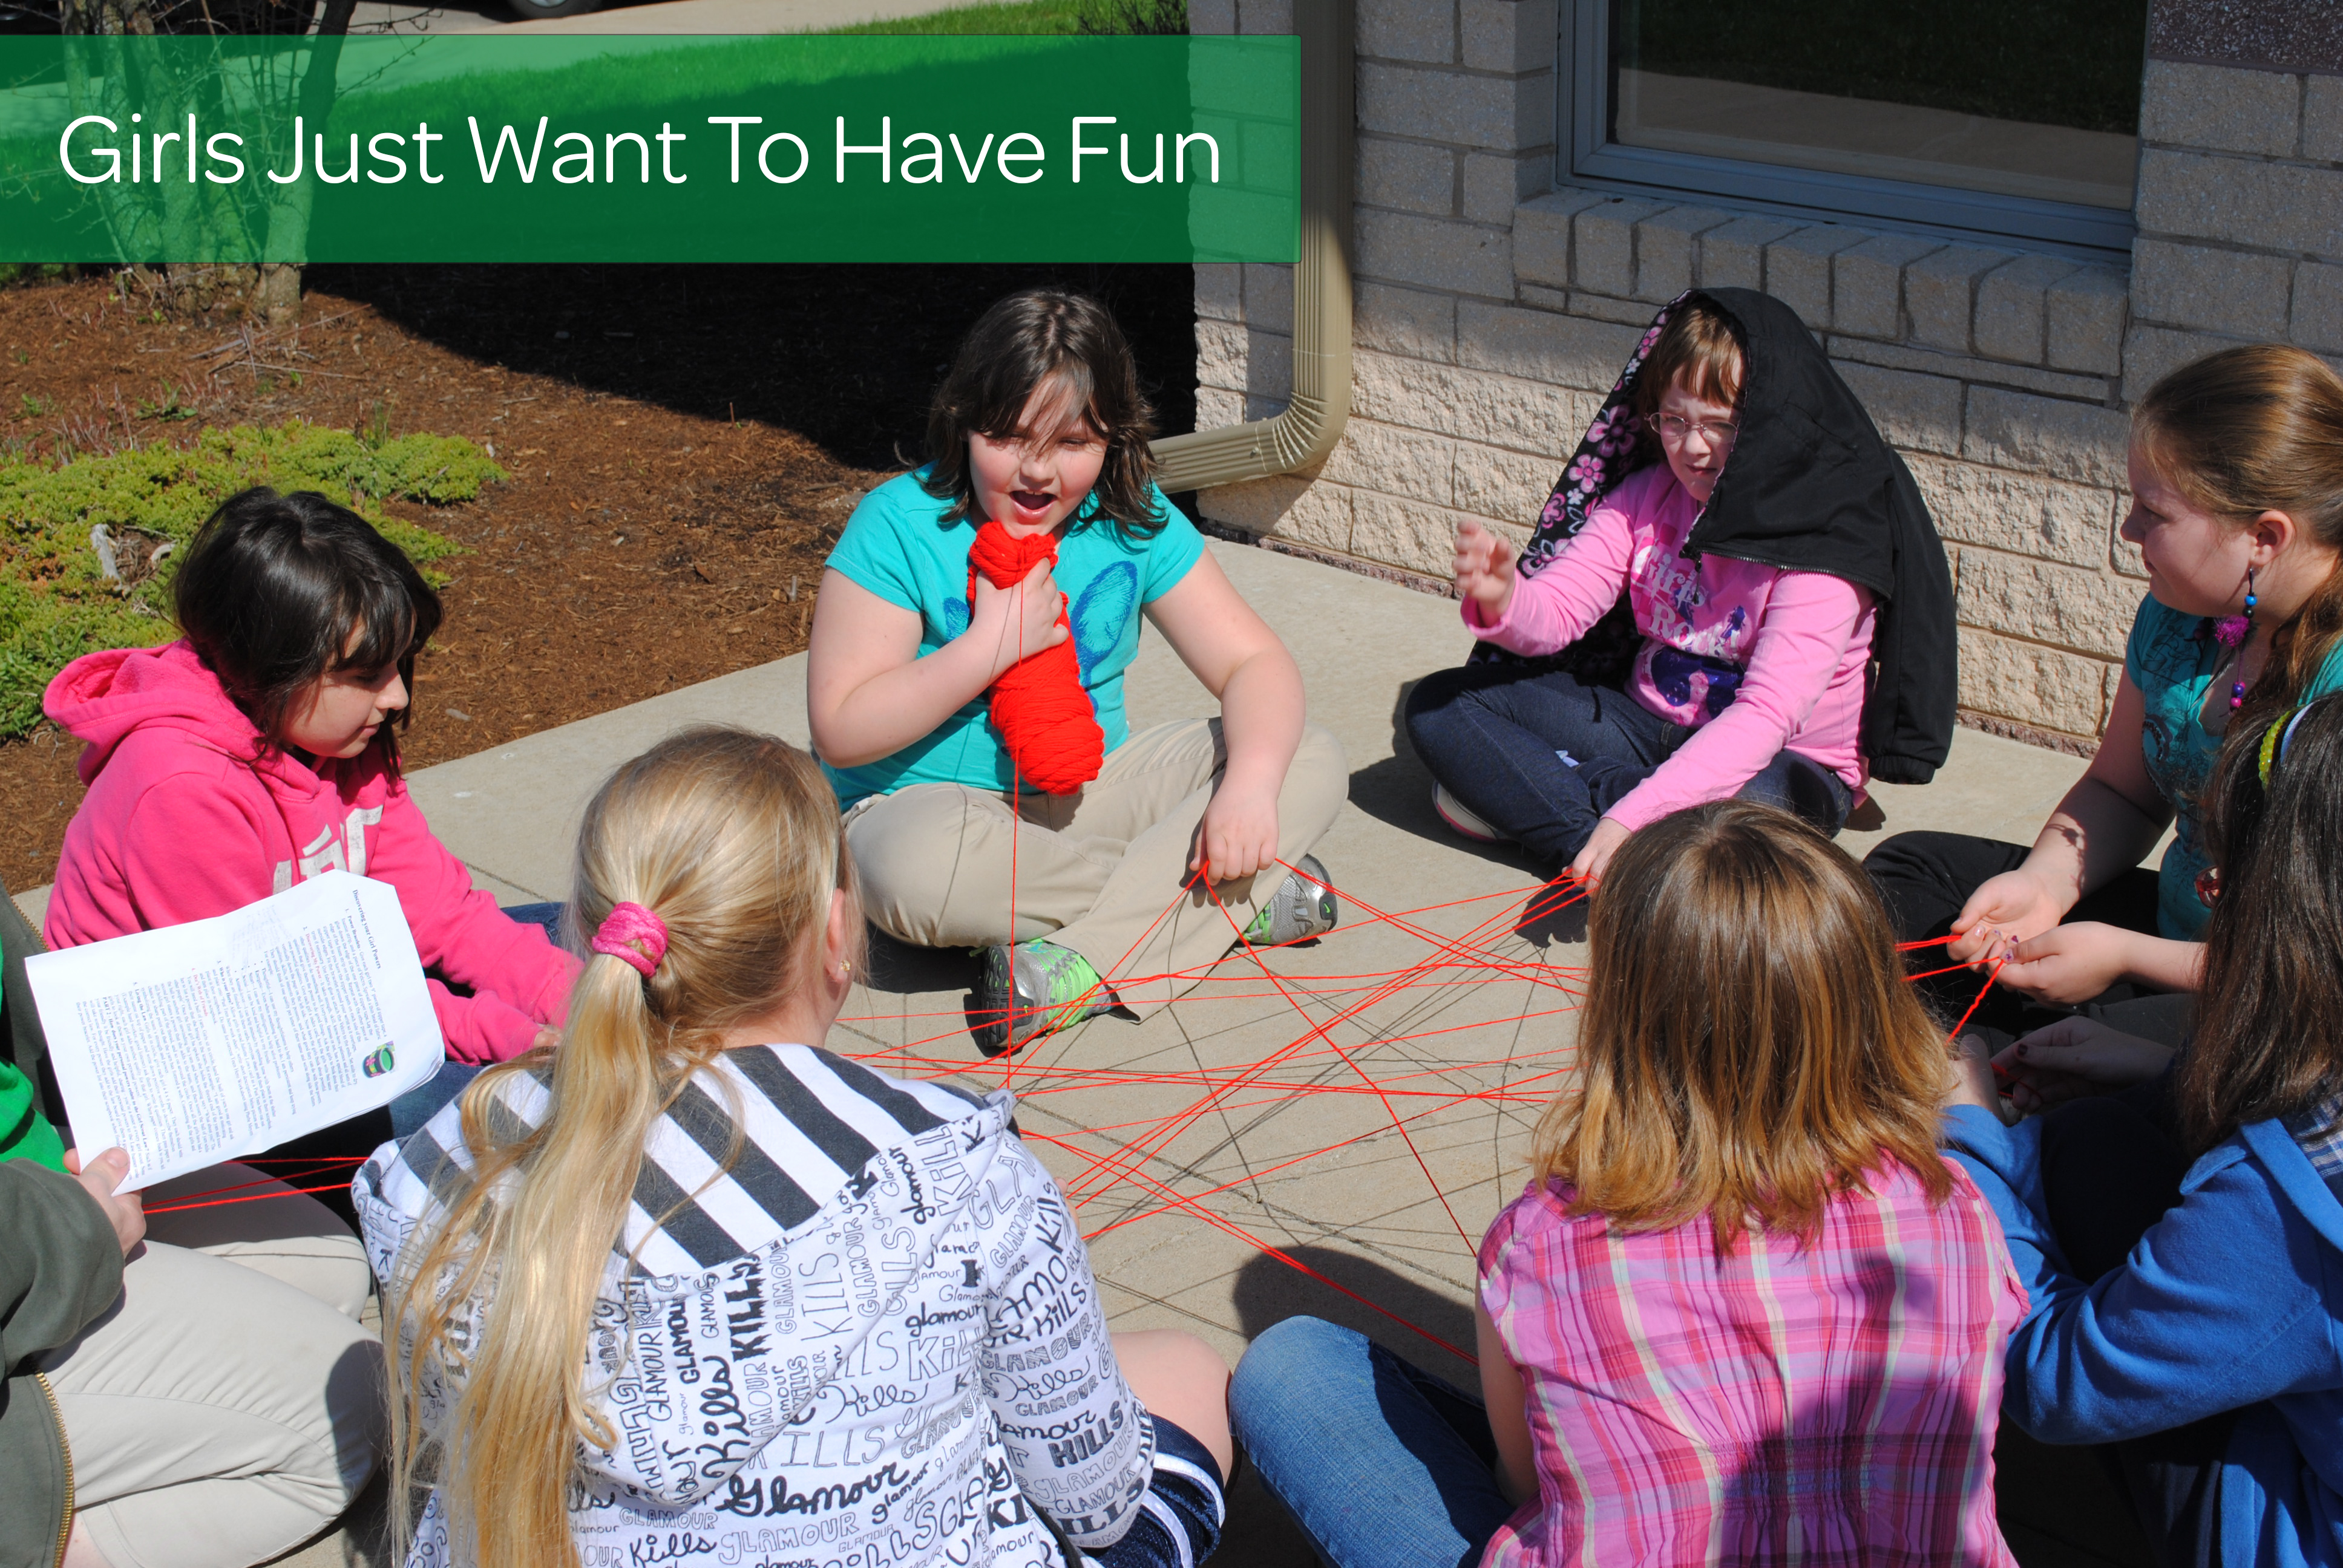 What are some ideas for a Girl Scout meeting?